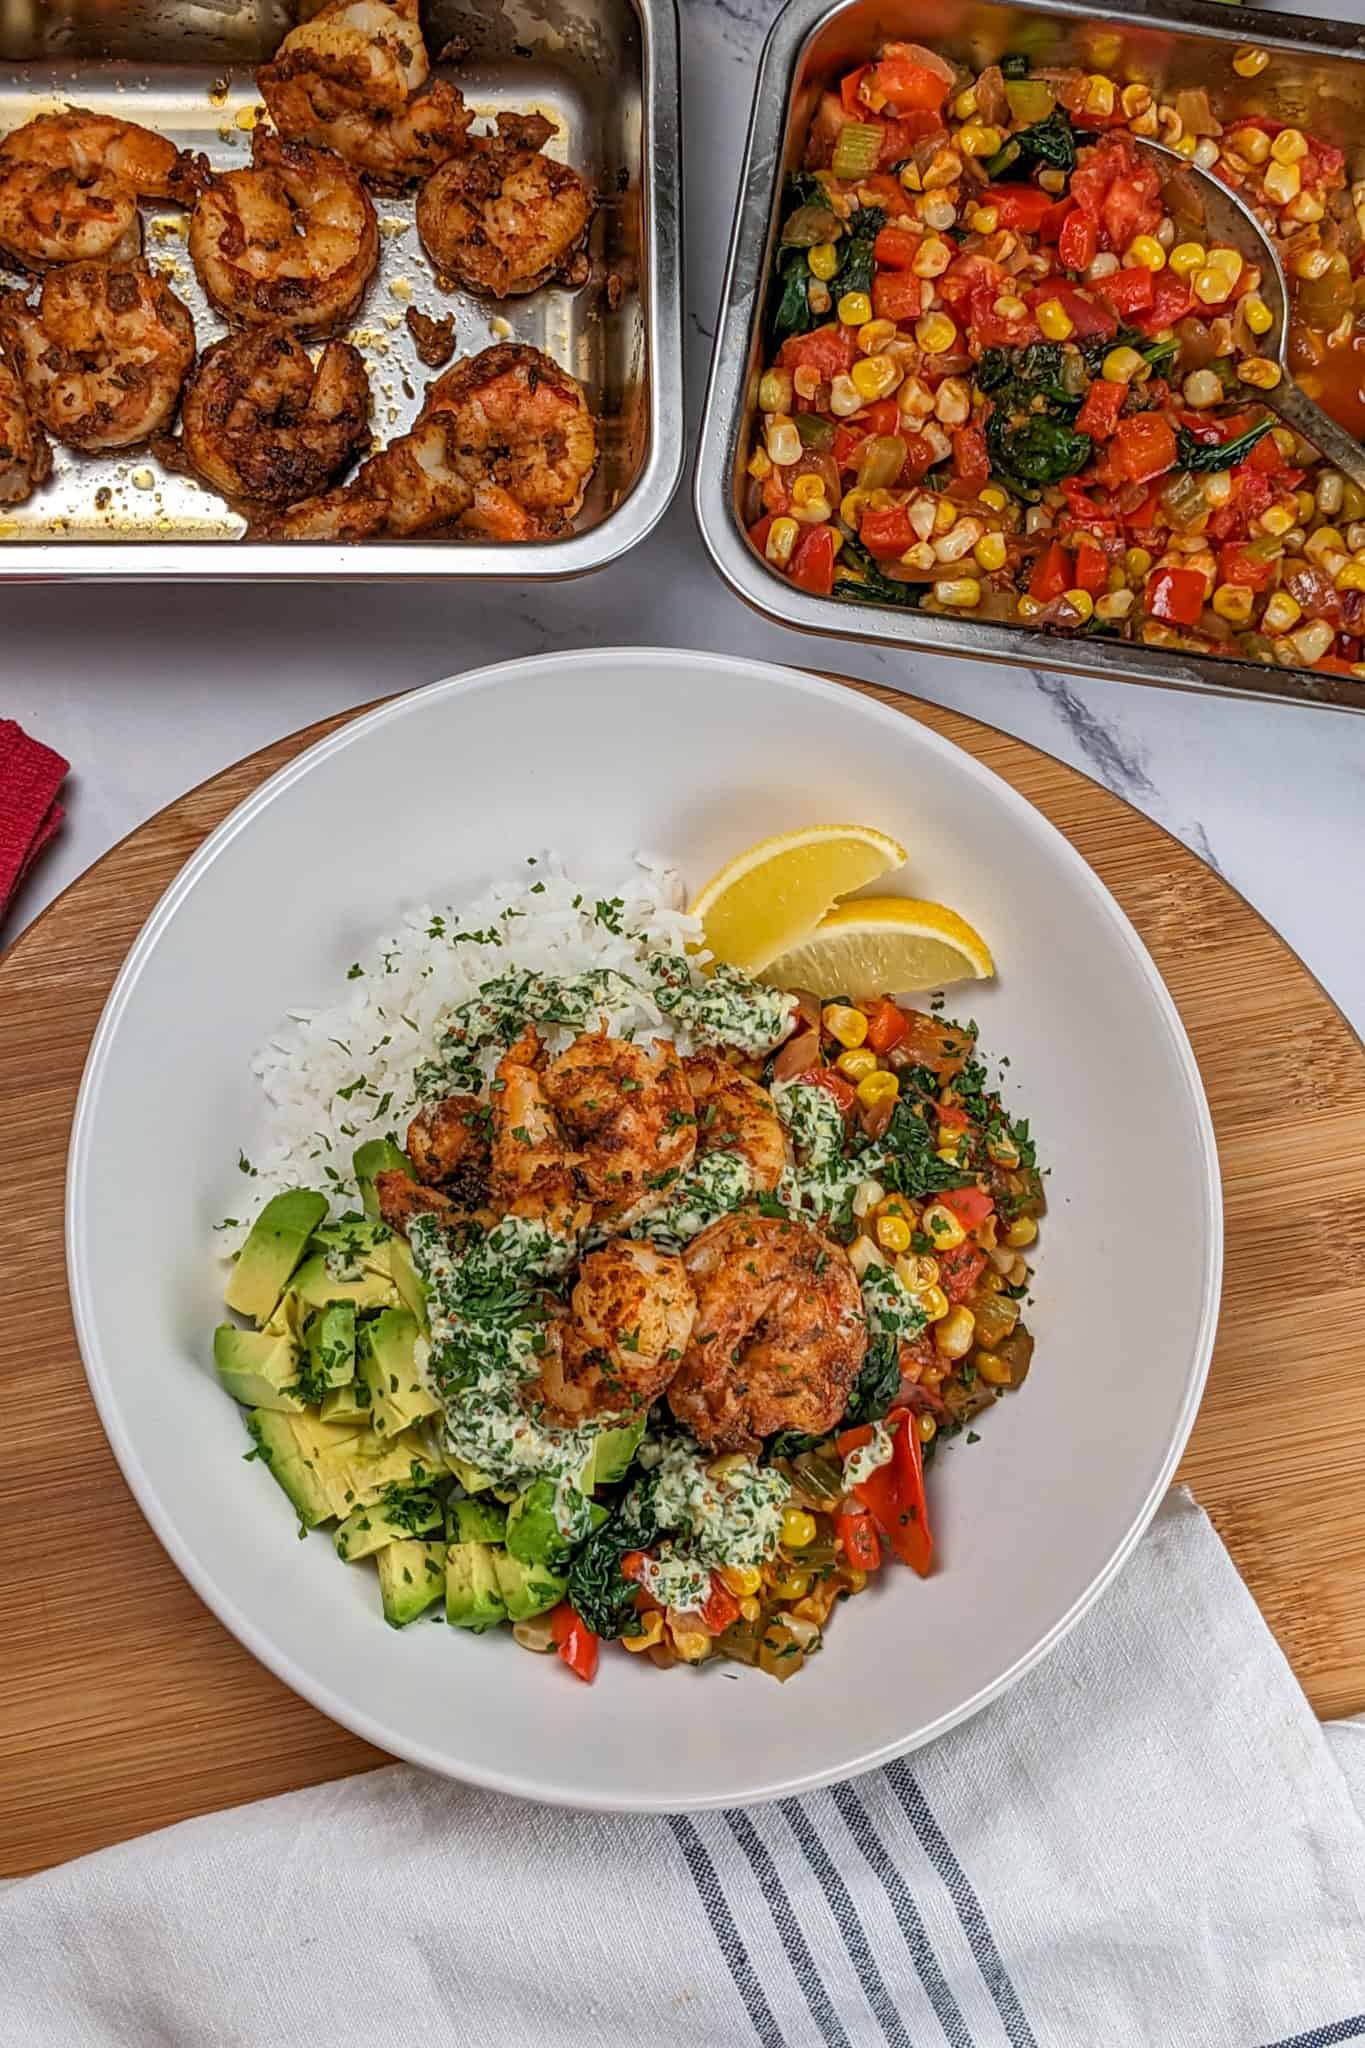 Top view zoomed out picture of the Spicy Cajun Shrimp Rice Bowl with Lemon Remoulade in a wide rim bowl with diced avocado and lemon wedges, next to a kitchen towel and two rectangle metal dishes with more cajun shrimp and vegetables.